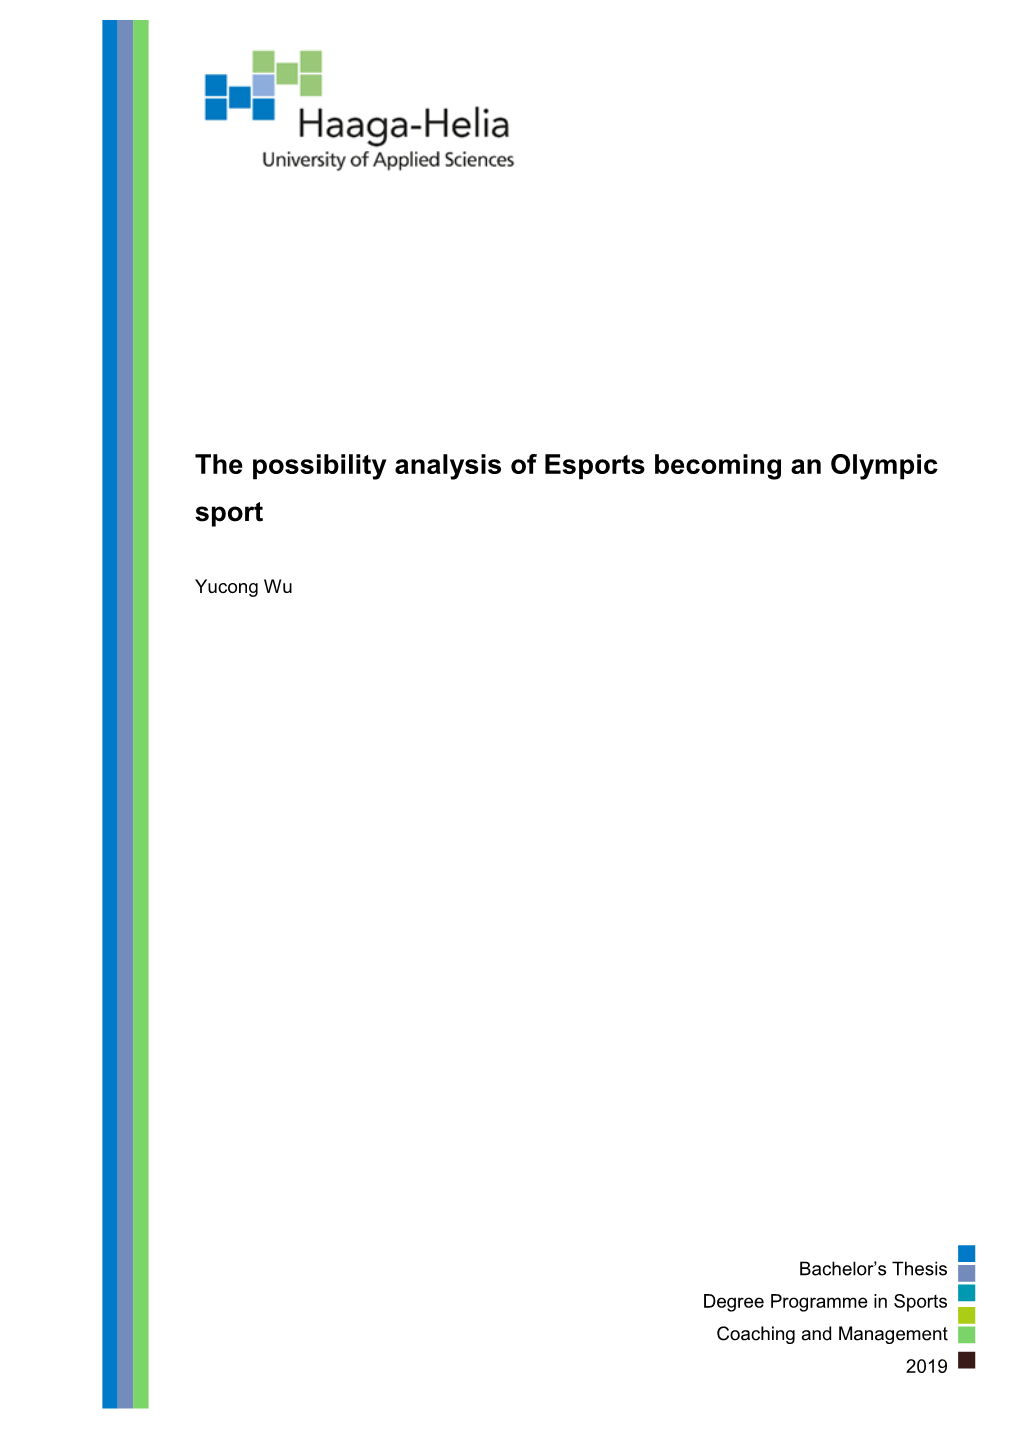 The Possibility Analysis of Esports Becoming an Olympic Sport